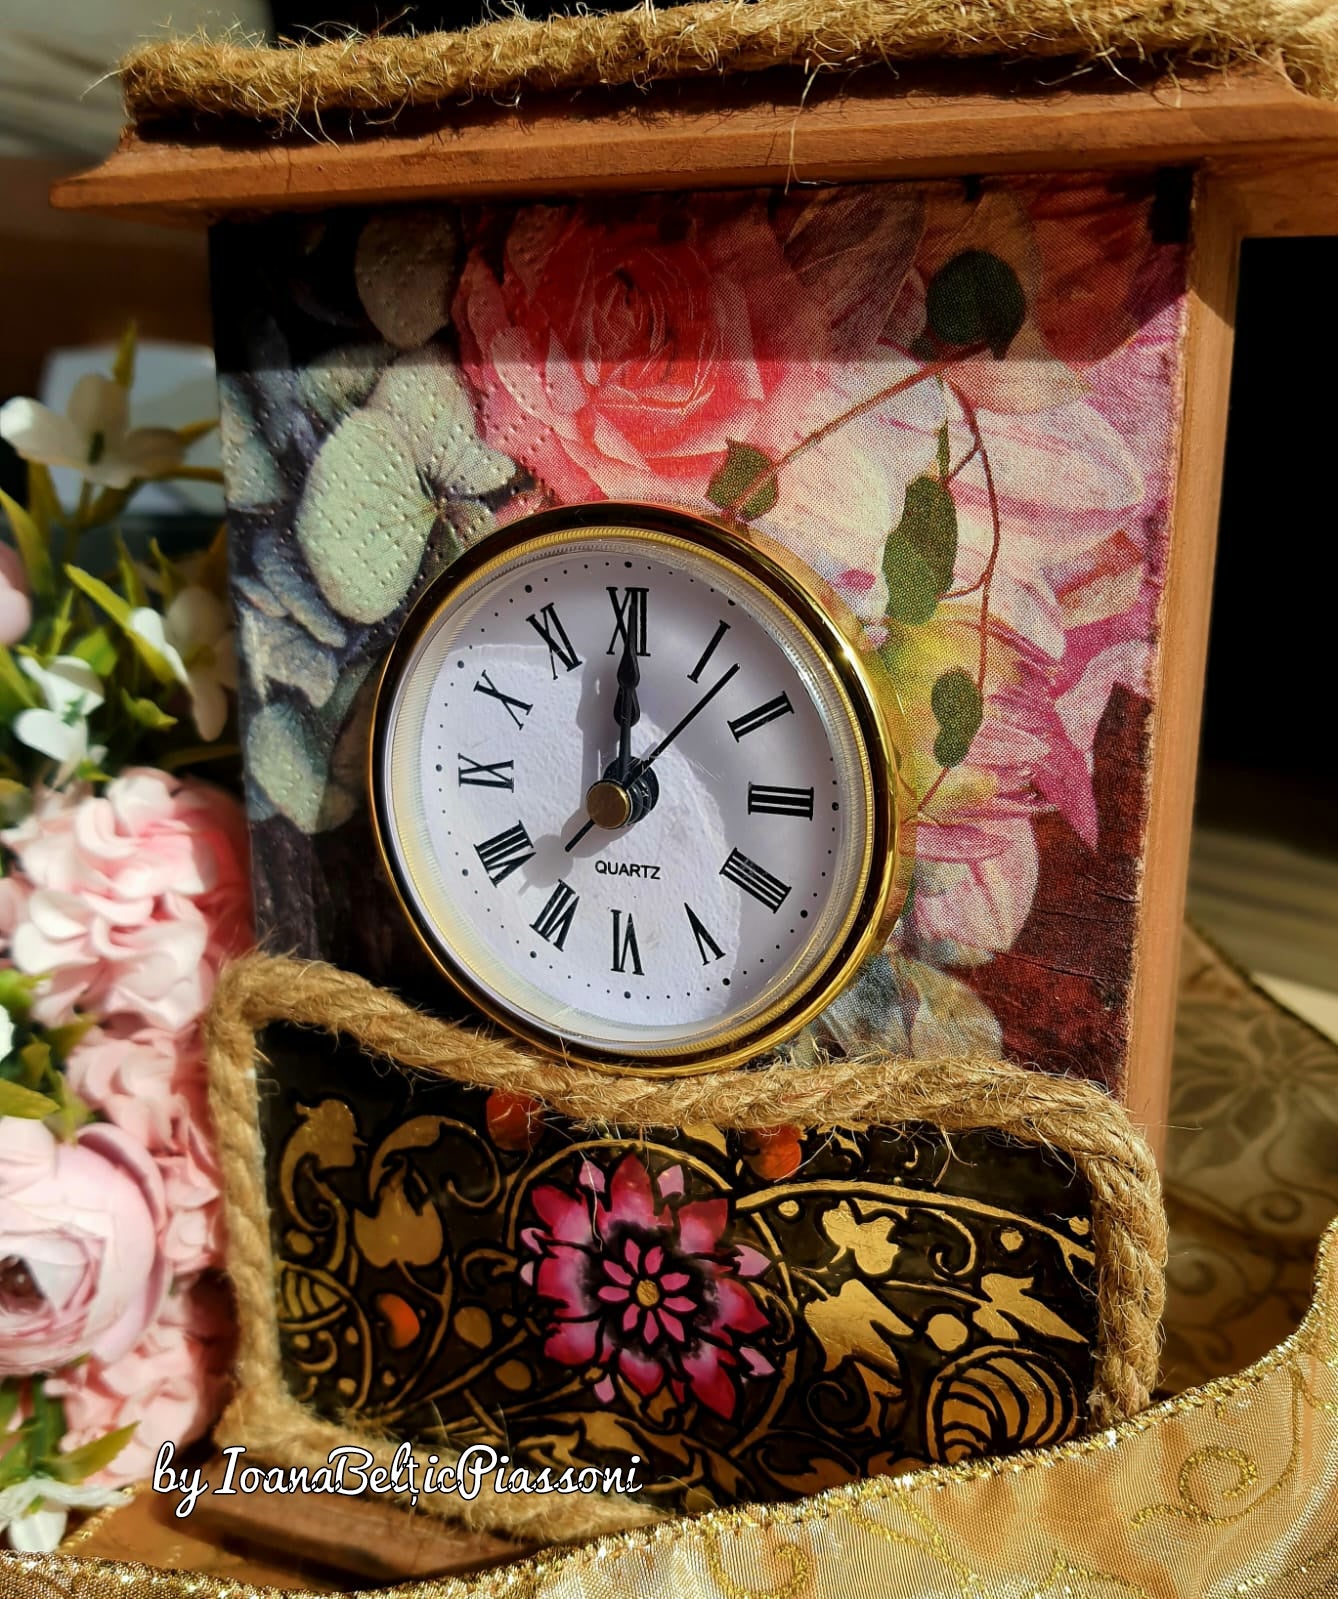 The Pulsation of Time: Mantel Clock with Painted Glass Works